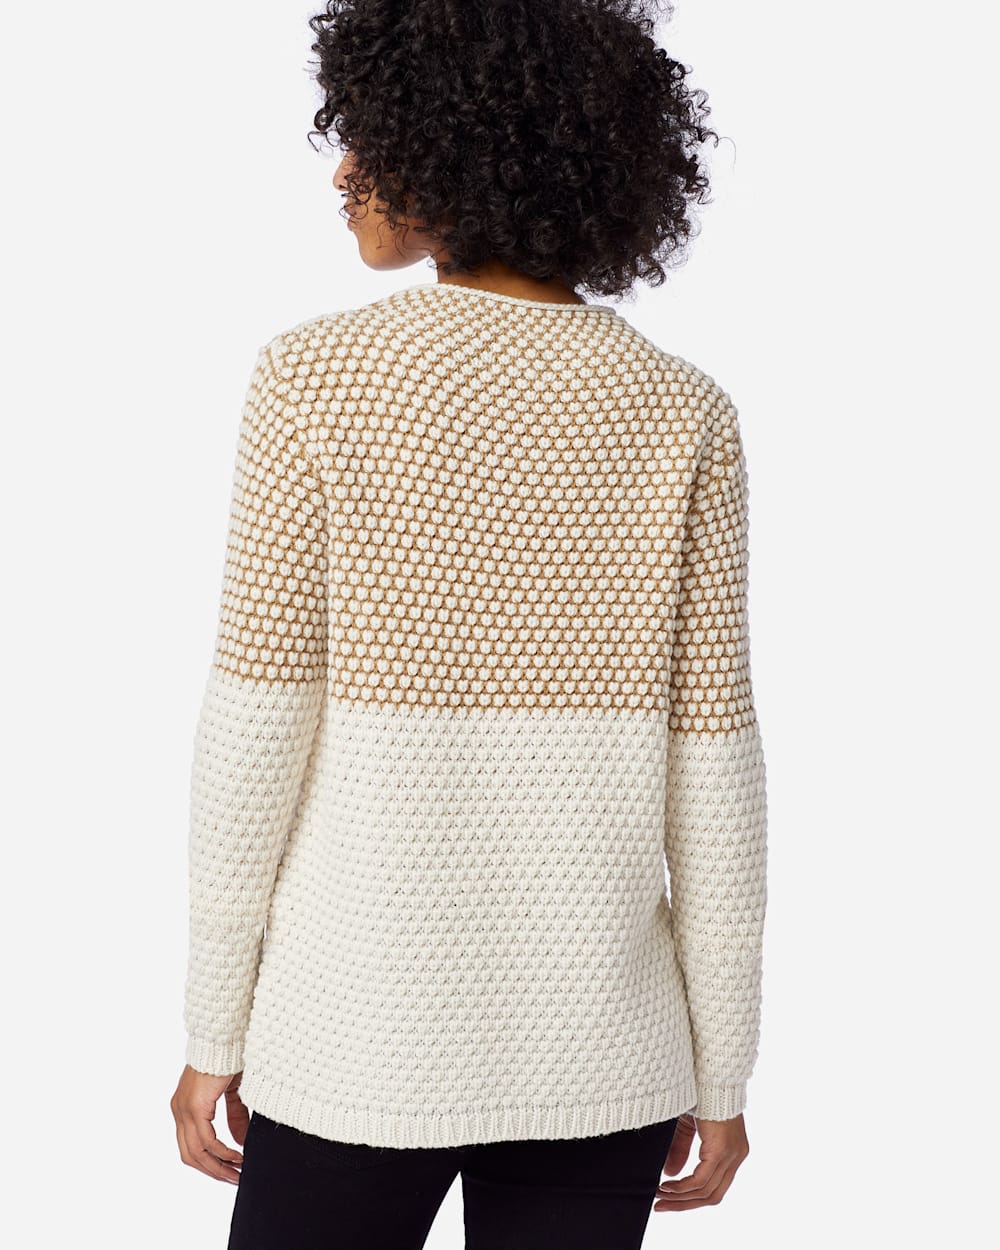 ALTERNATE VIEW OF WOMEN'S TEXTURED FUNNEL NECK PULLOVER IN CAMEL/ANTIQUE WHITE image number 3